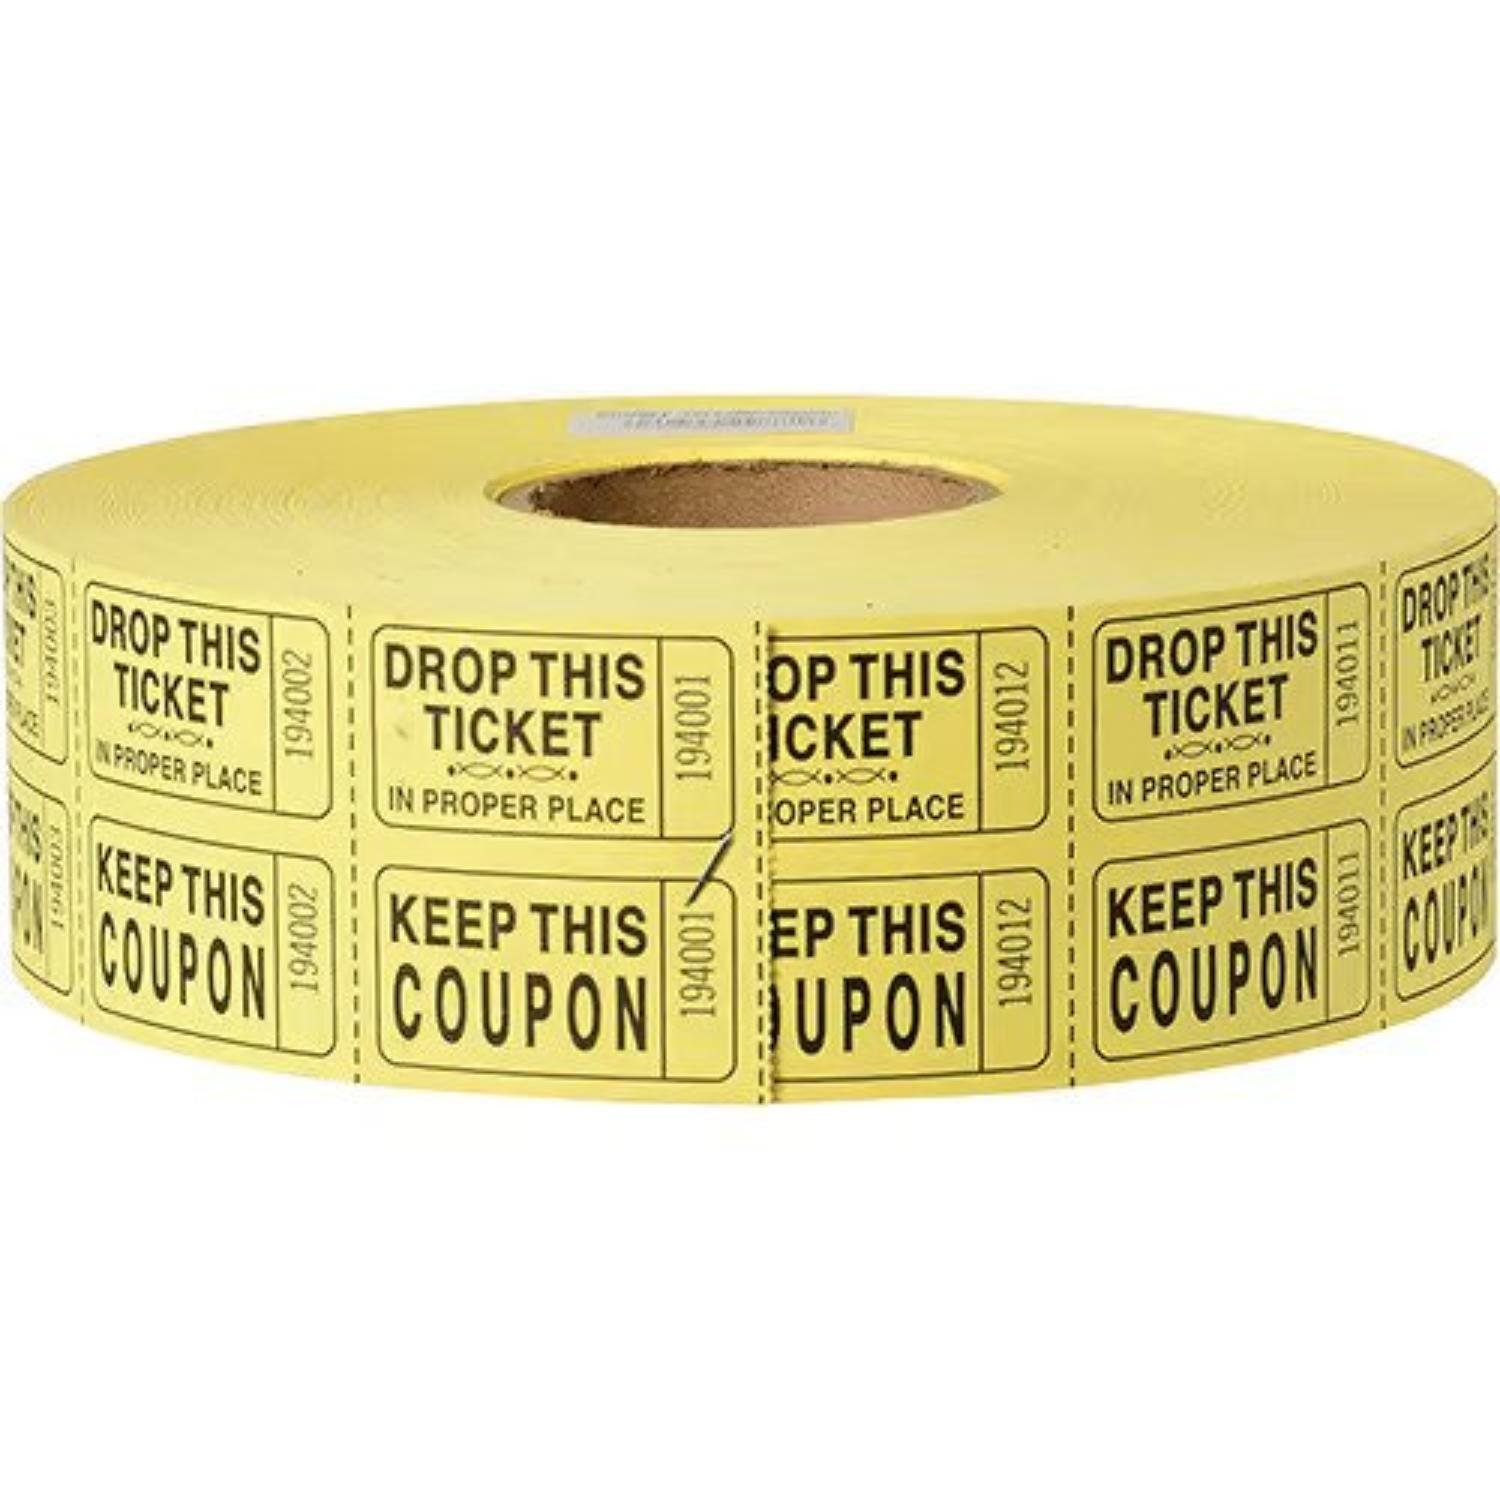 Double Ticket Yellow - 2000 tickets